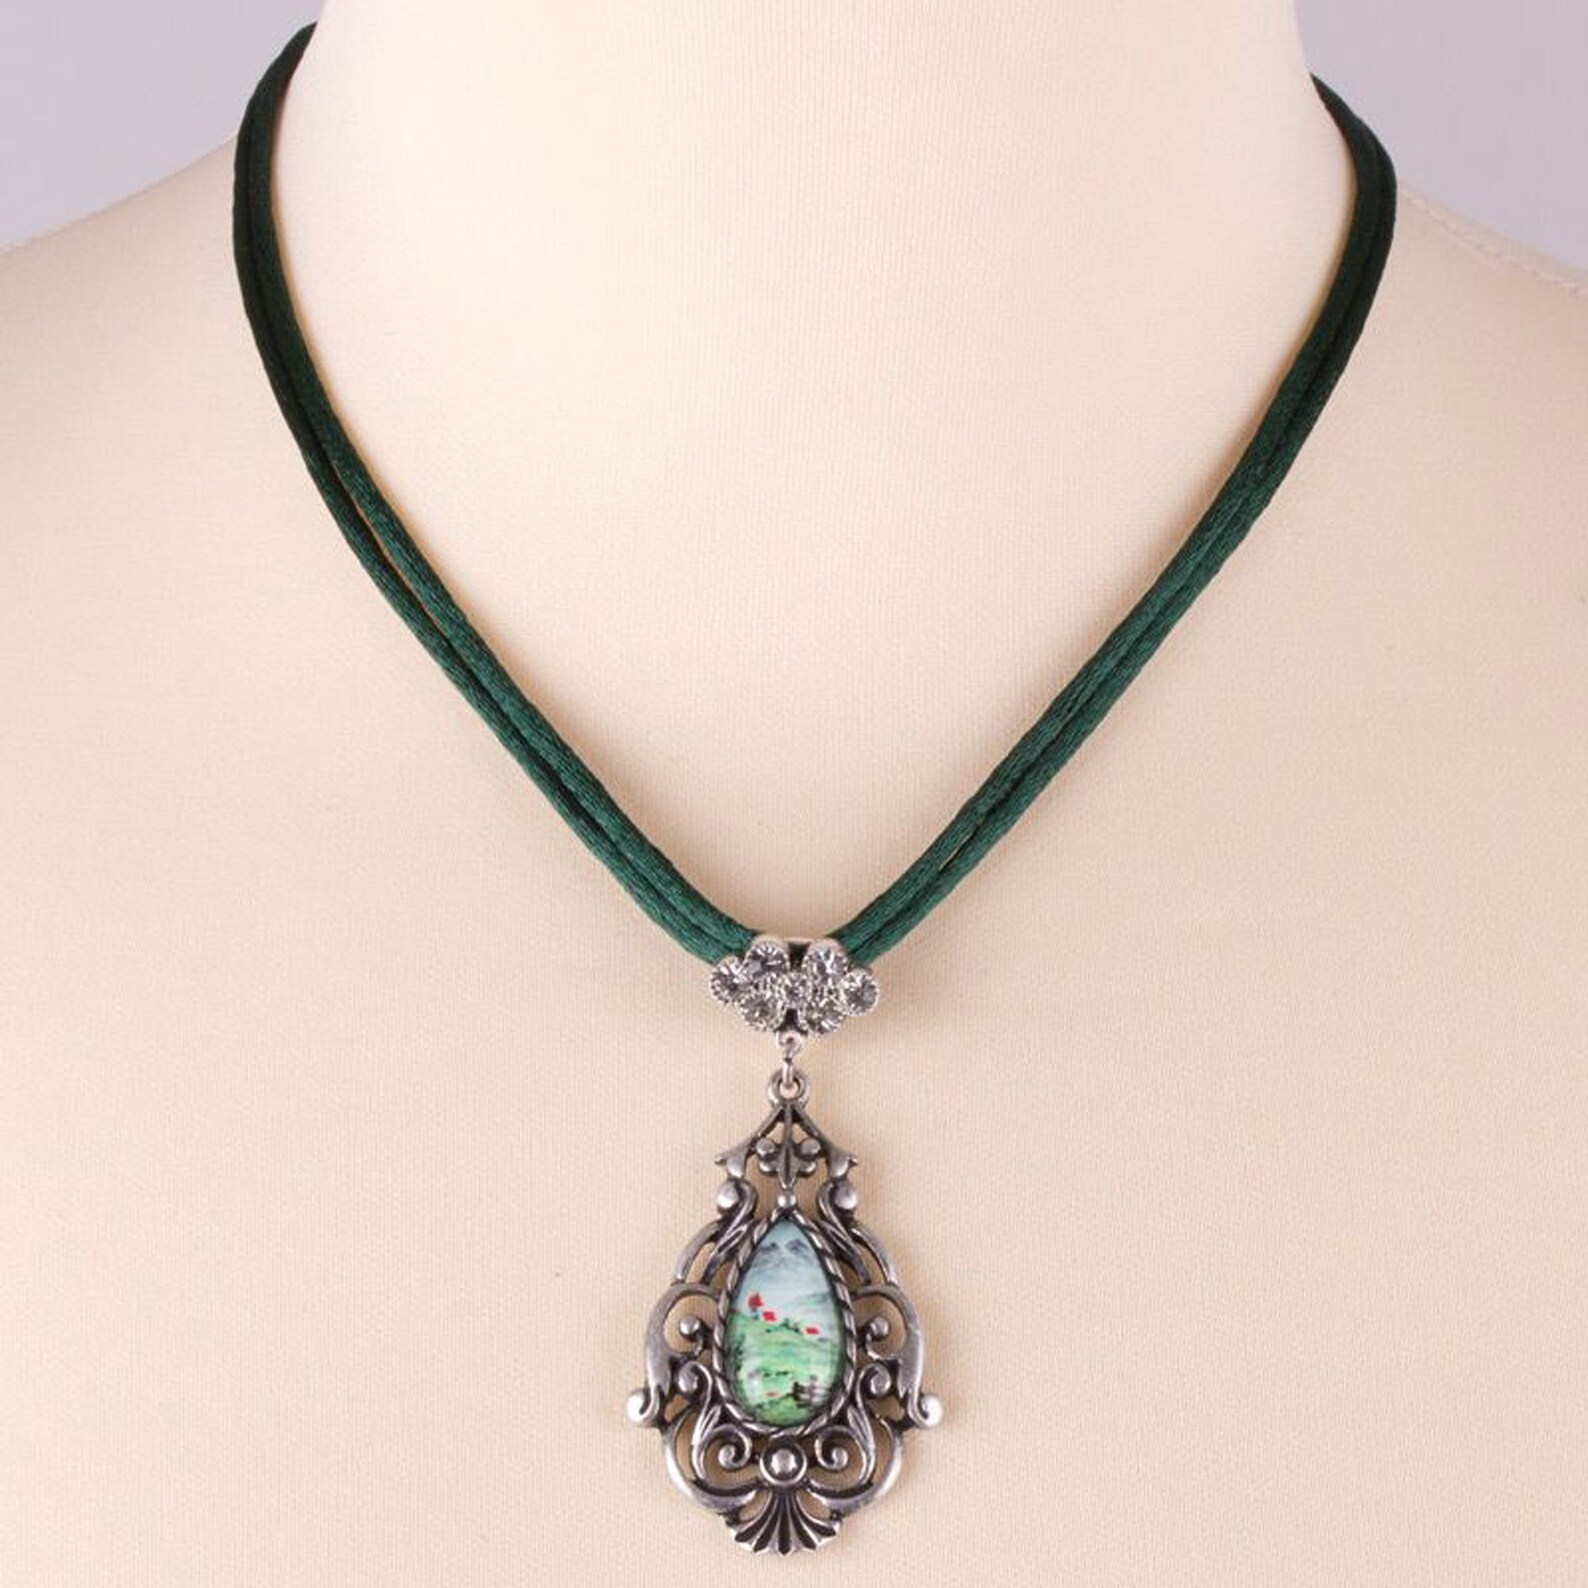 Necklace Costume Jewelry with Pendant for Women Dirndl